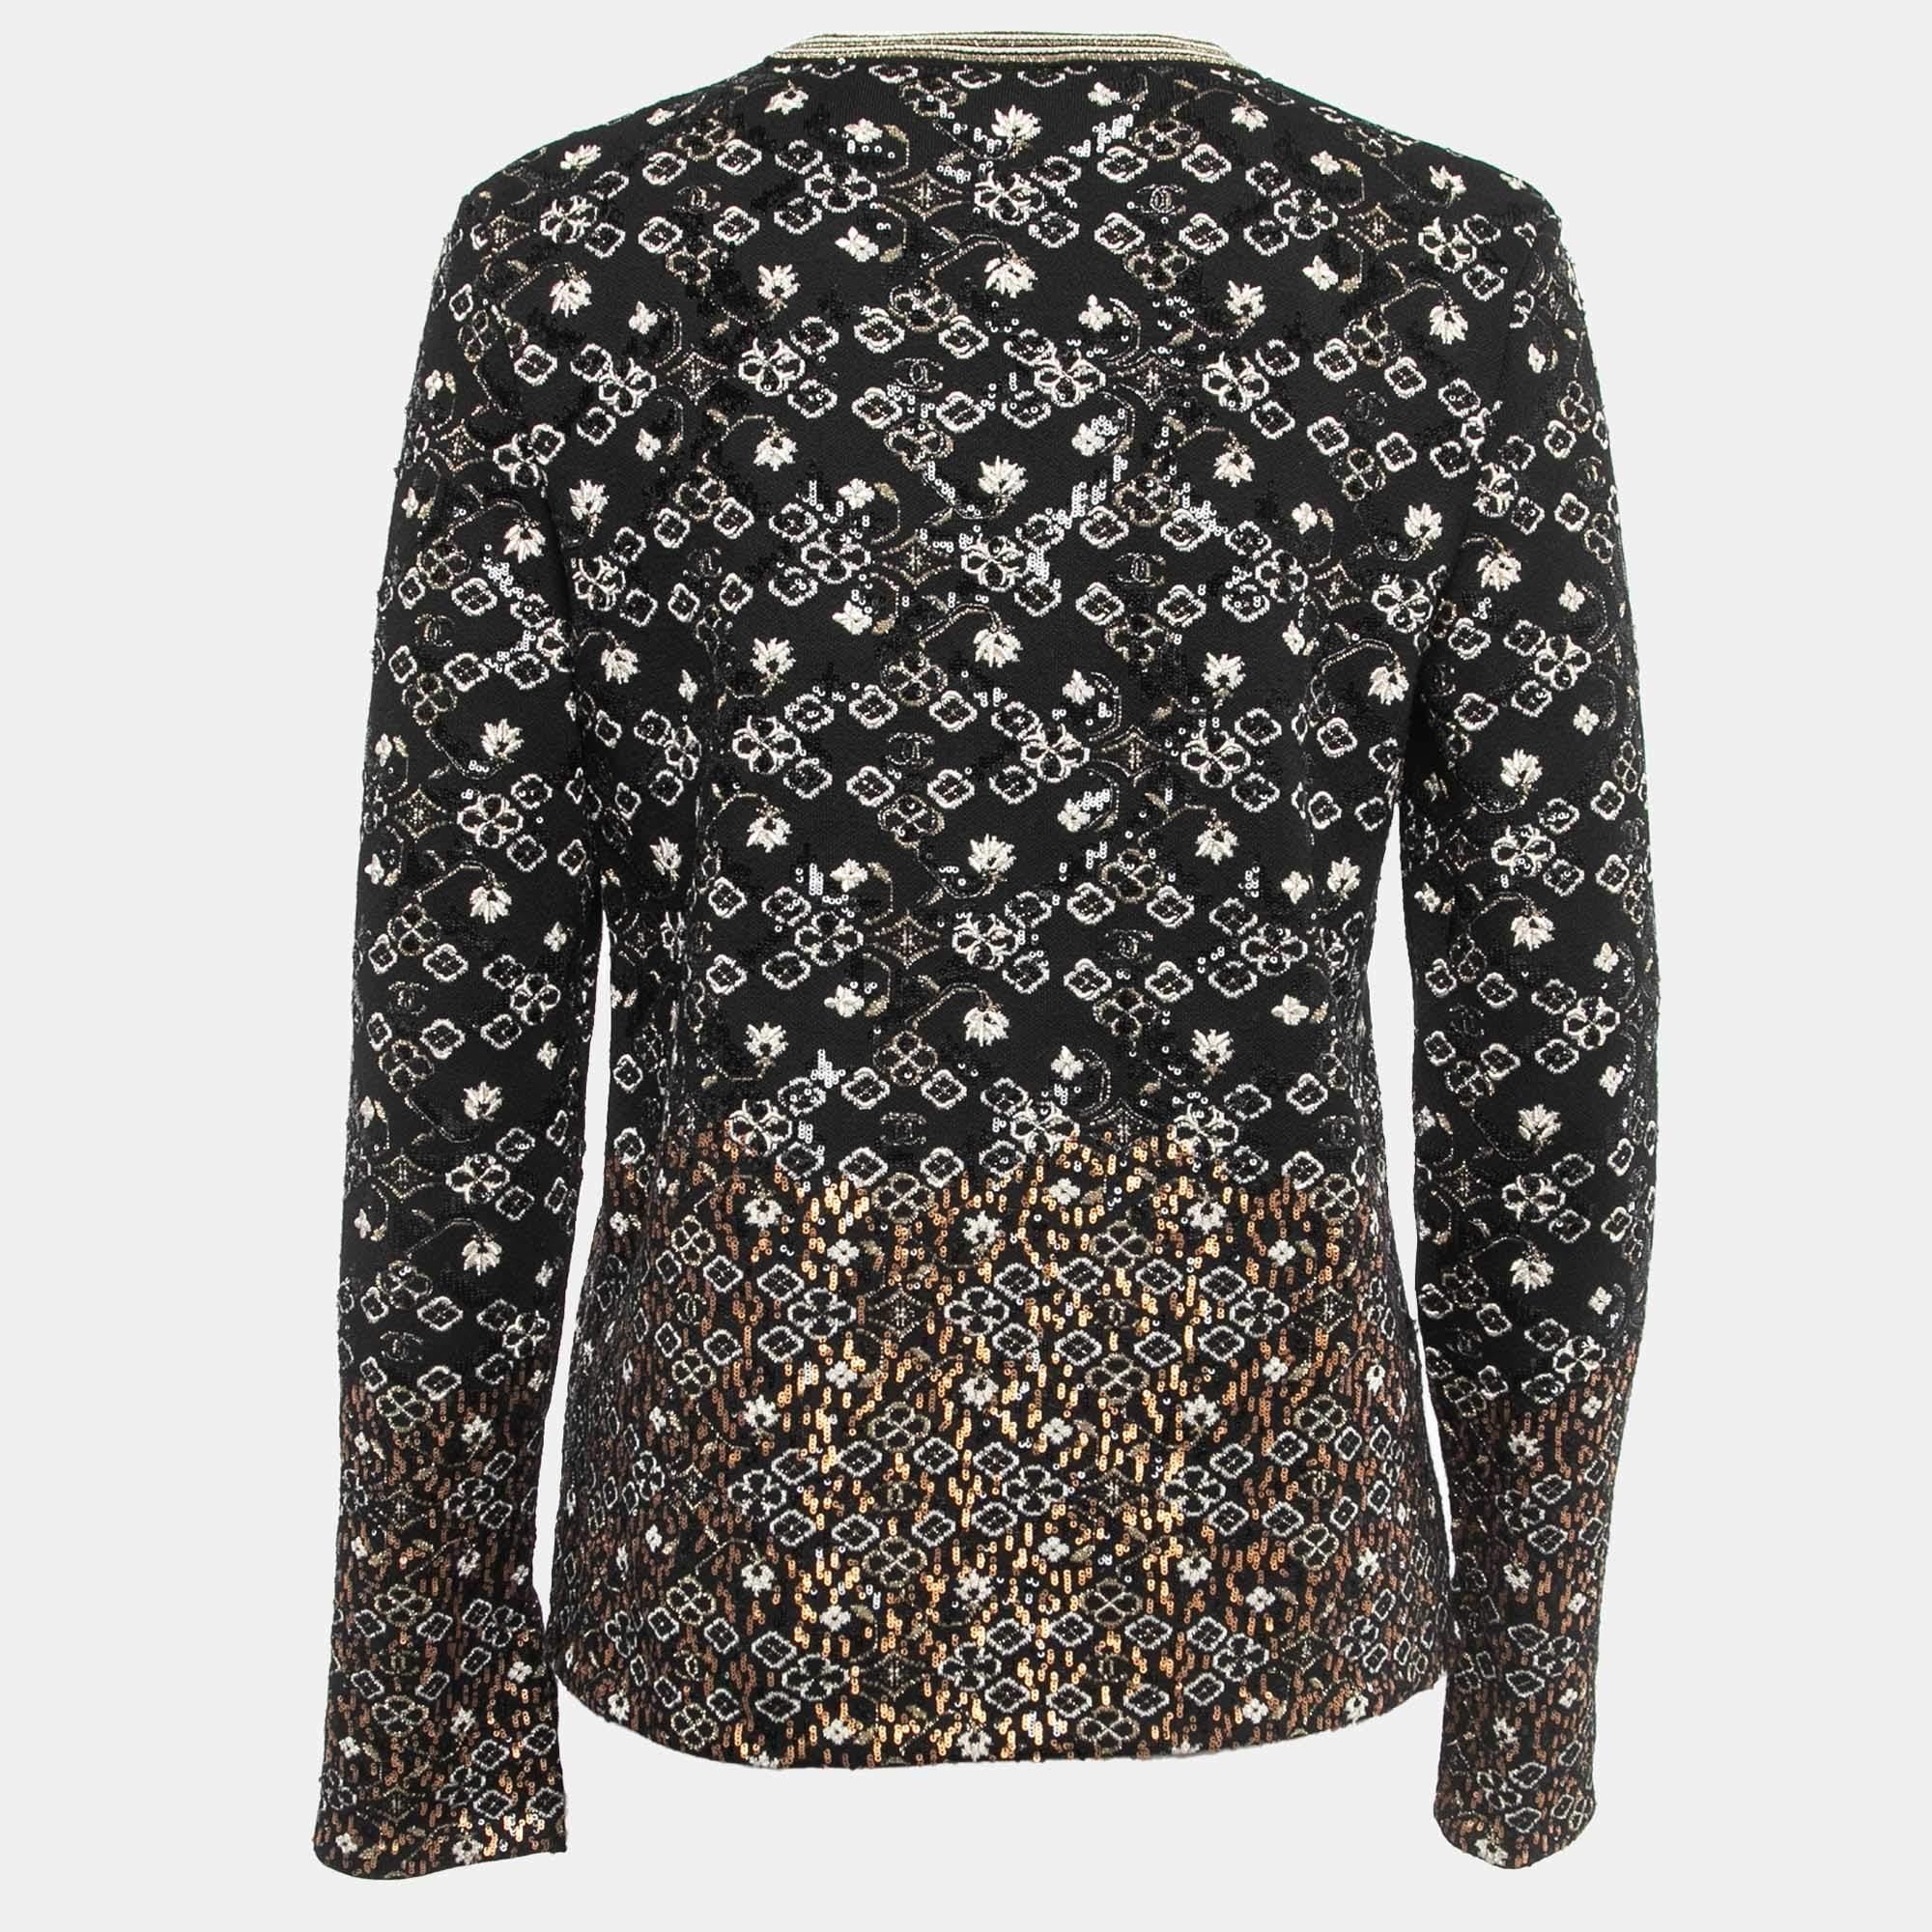 Rest assured that you are in style when wearing this Chanel jumper. It is a well-made creation that has just the right details to offer a refined casualwear look. Get this sequin embroidered to add an extra layer of warmth on chilly days or nights.

